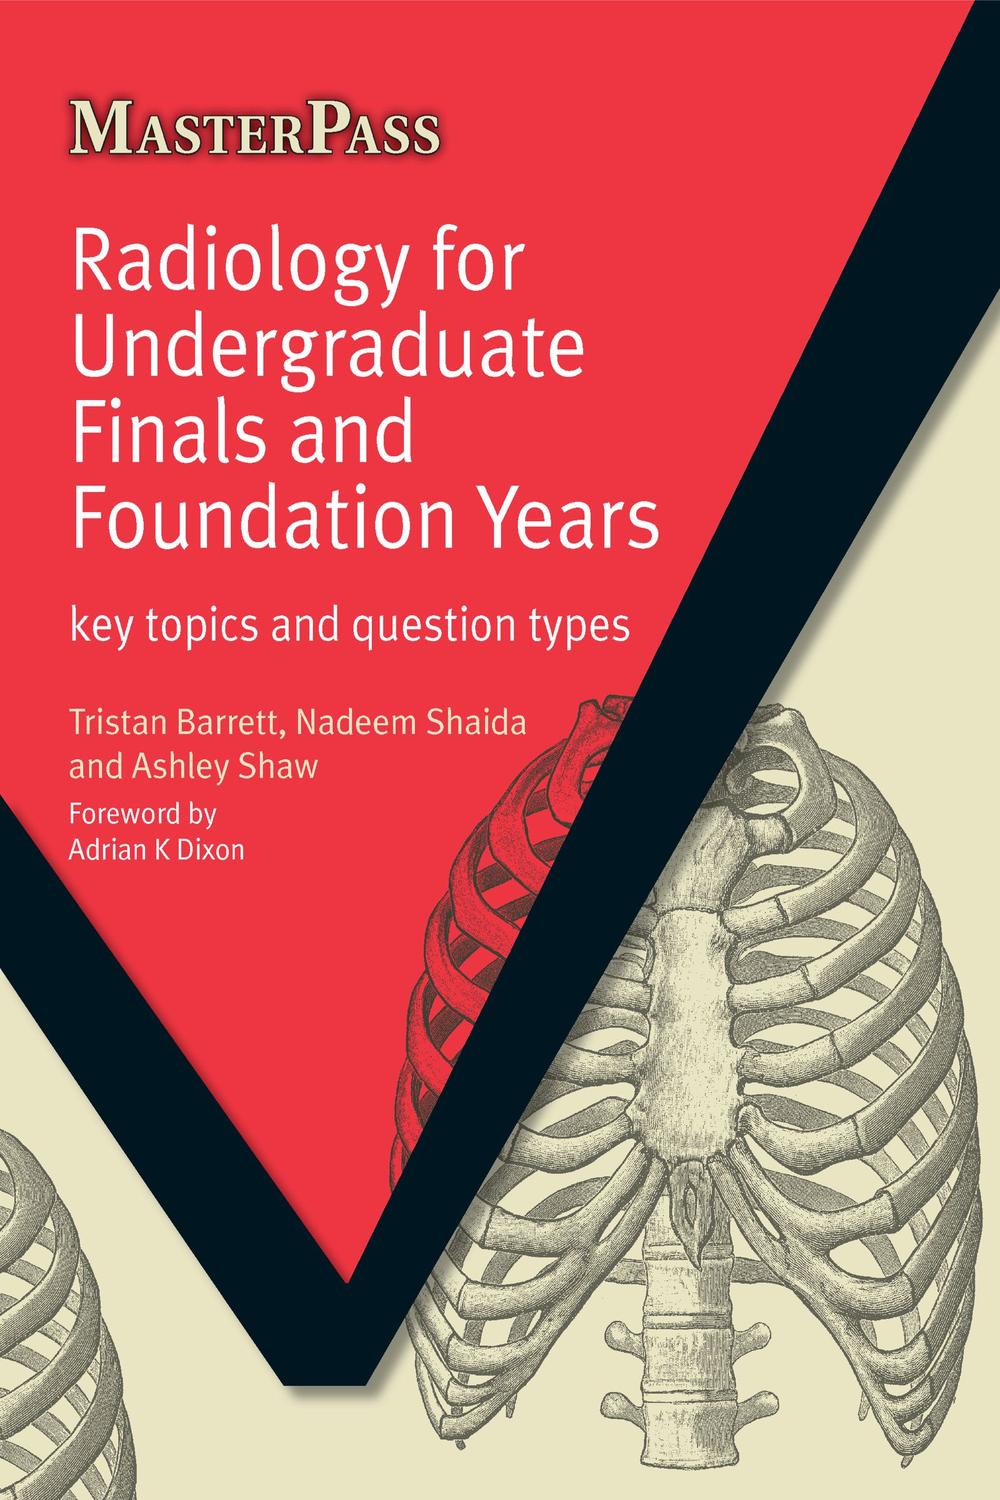 Radiology for Undergraduate Finals and Foundation Years